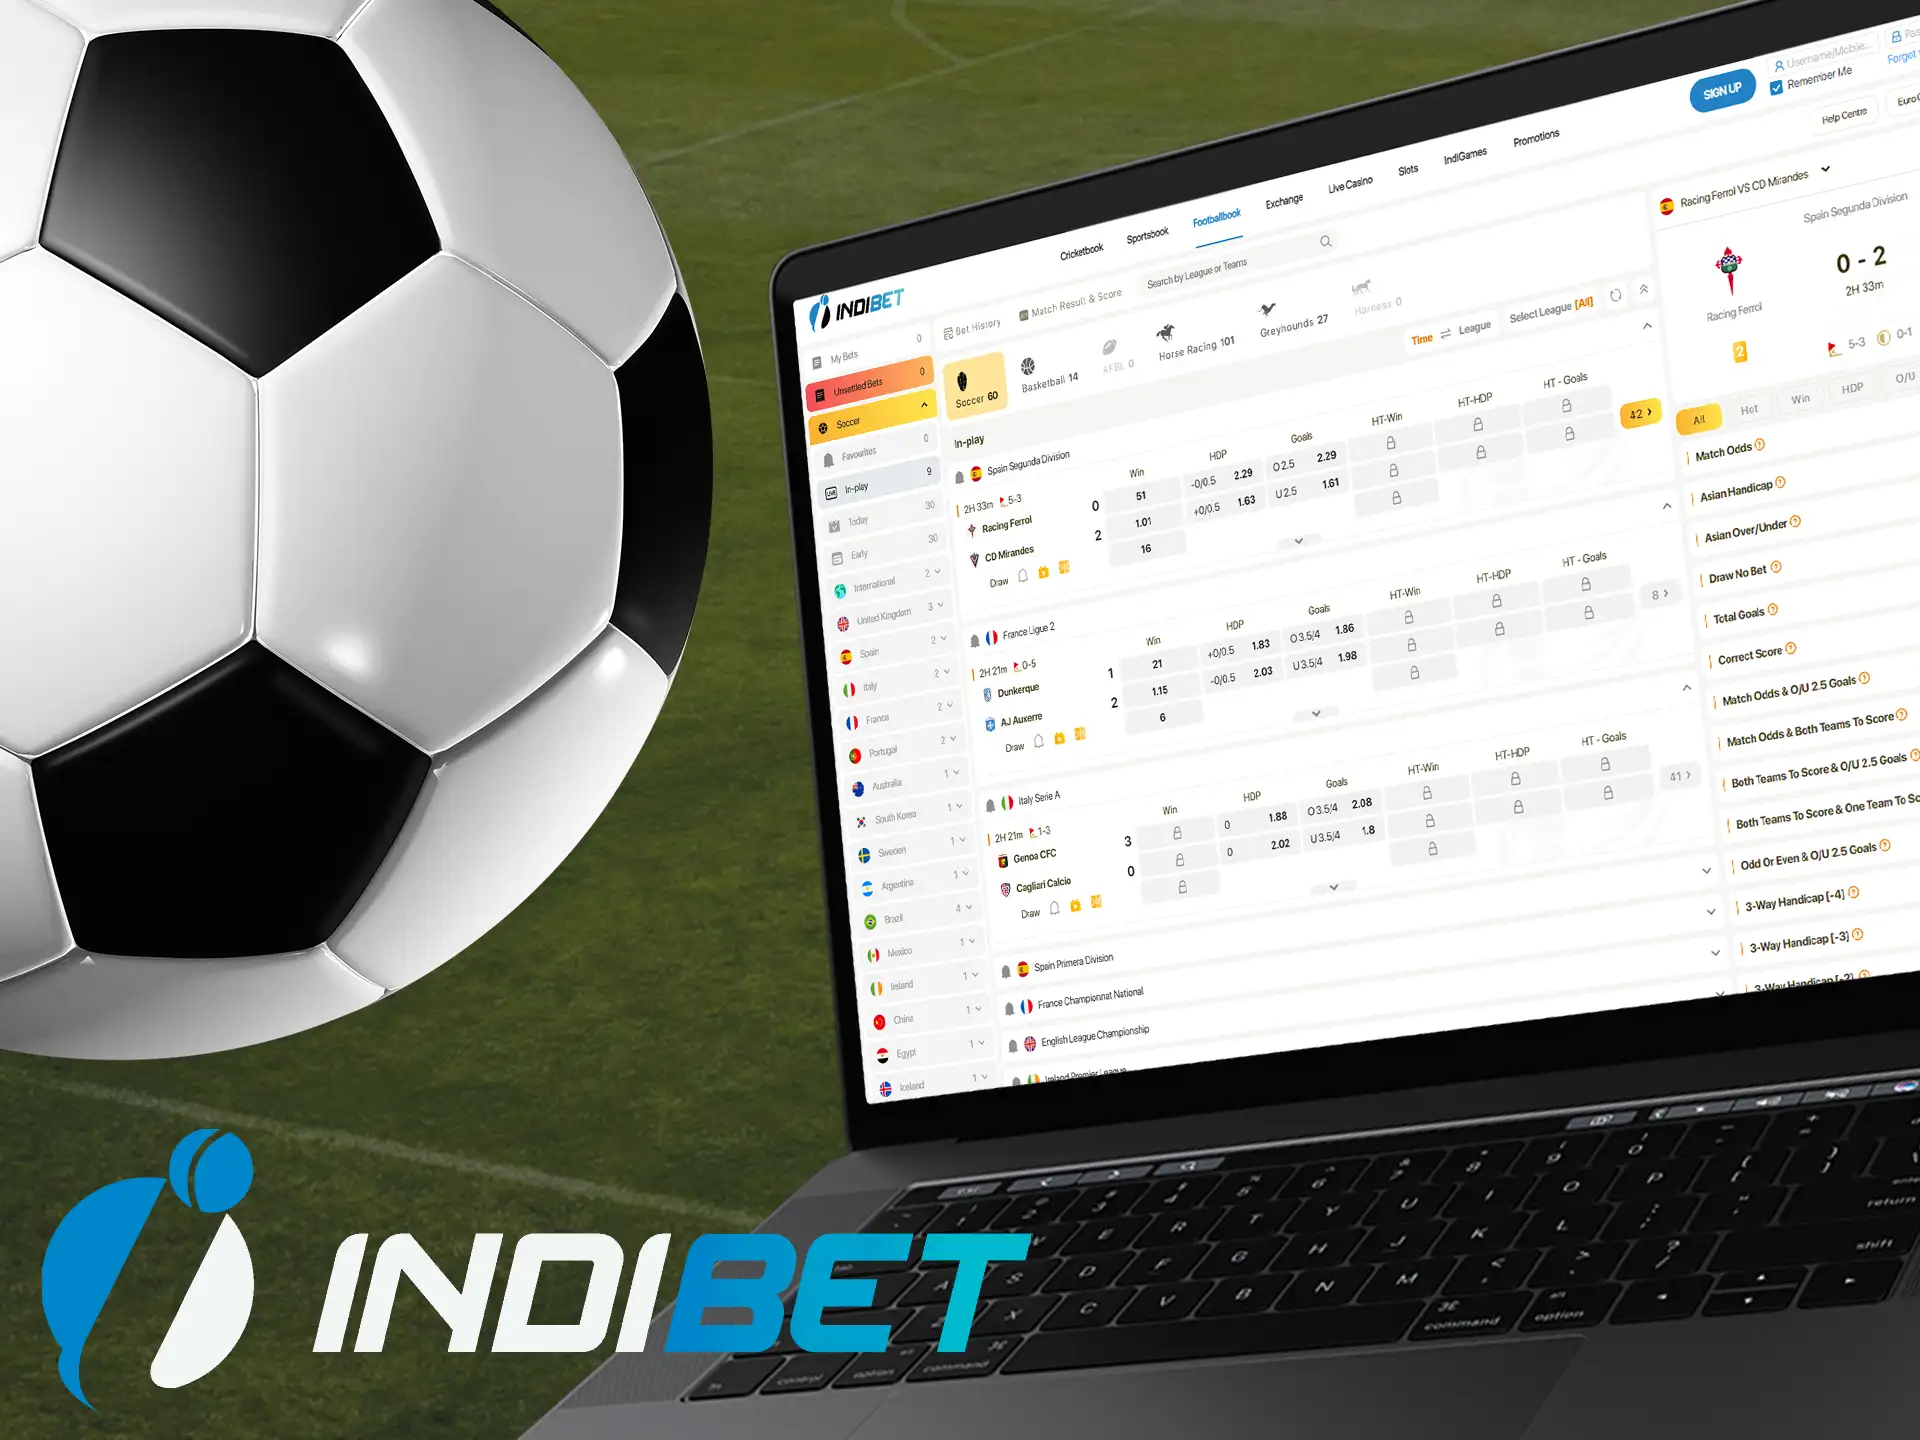 Indibet offers many football events available for betting.